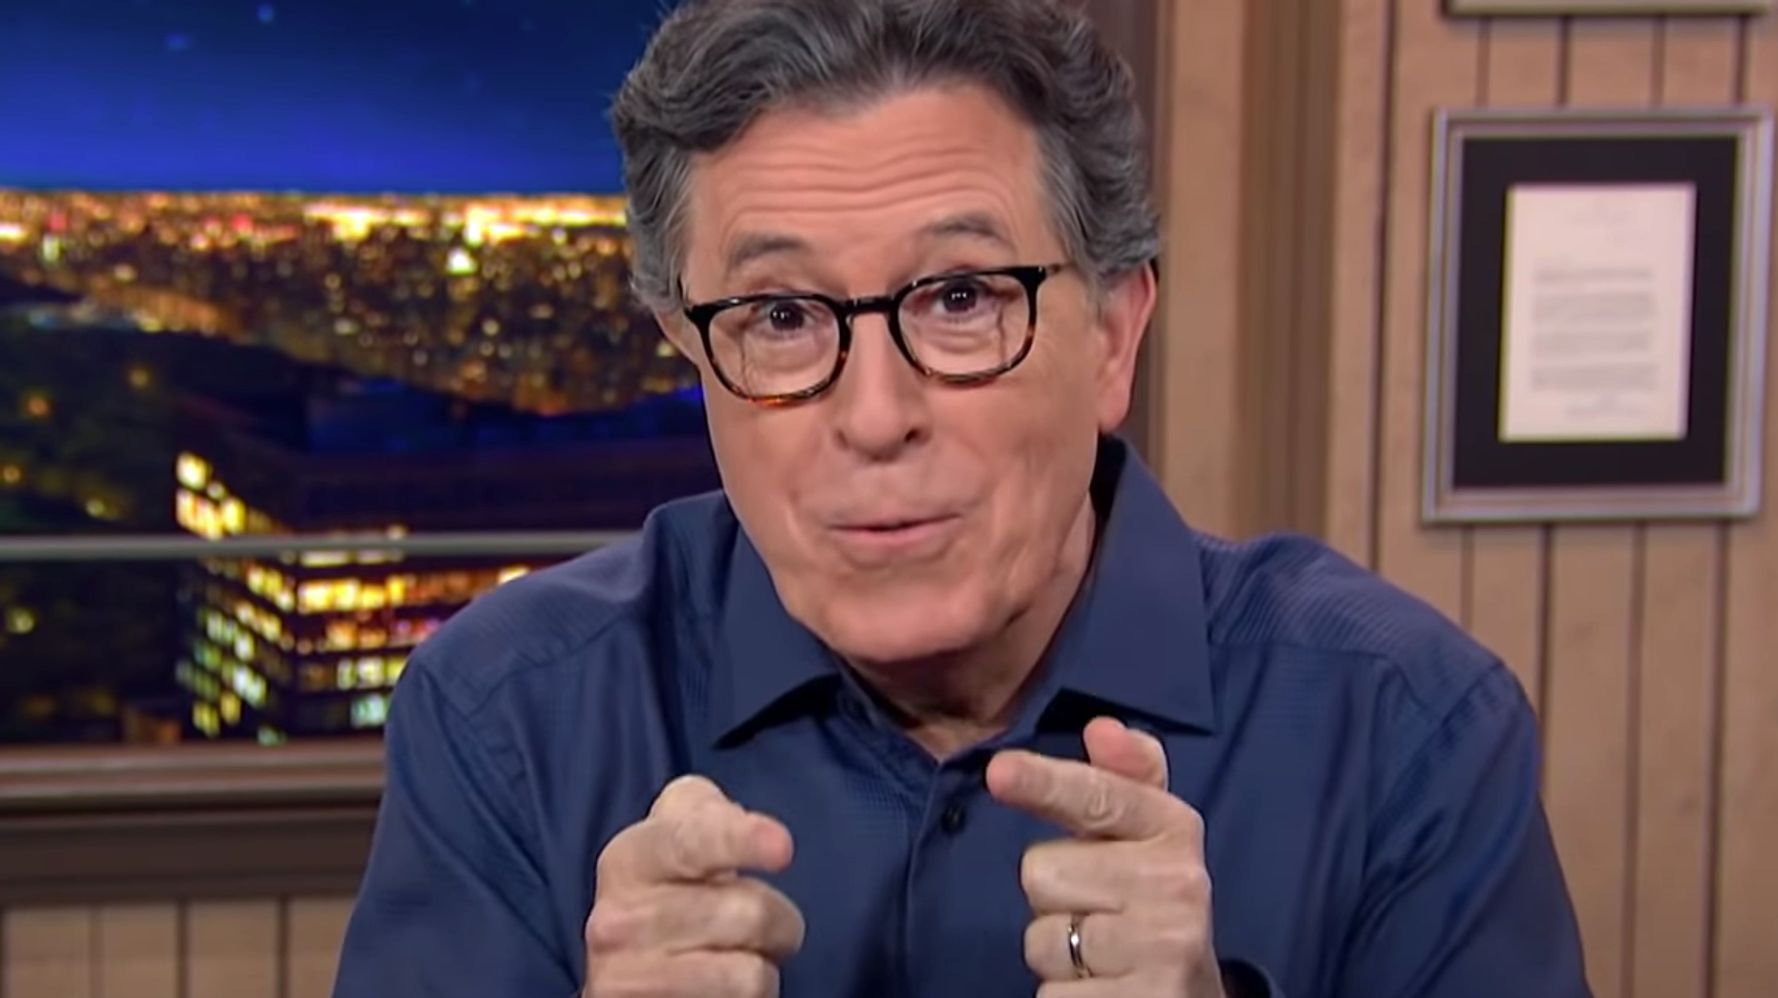 Stephen Colbert Has A Hilarious Way To Convince Republicans To Get The Vaccine